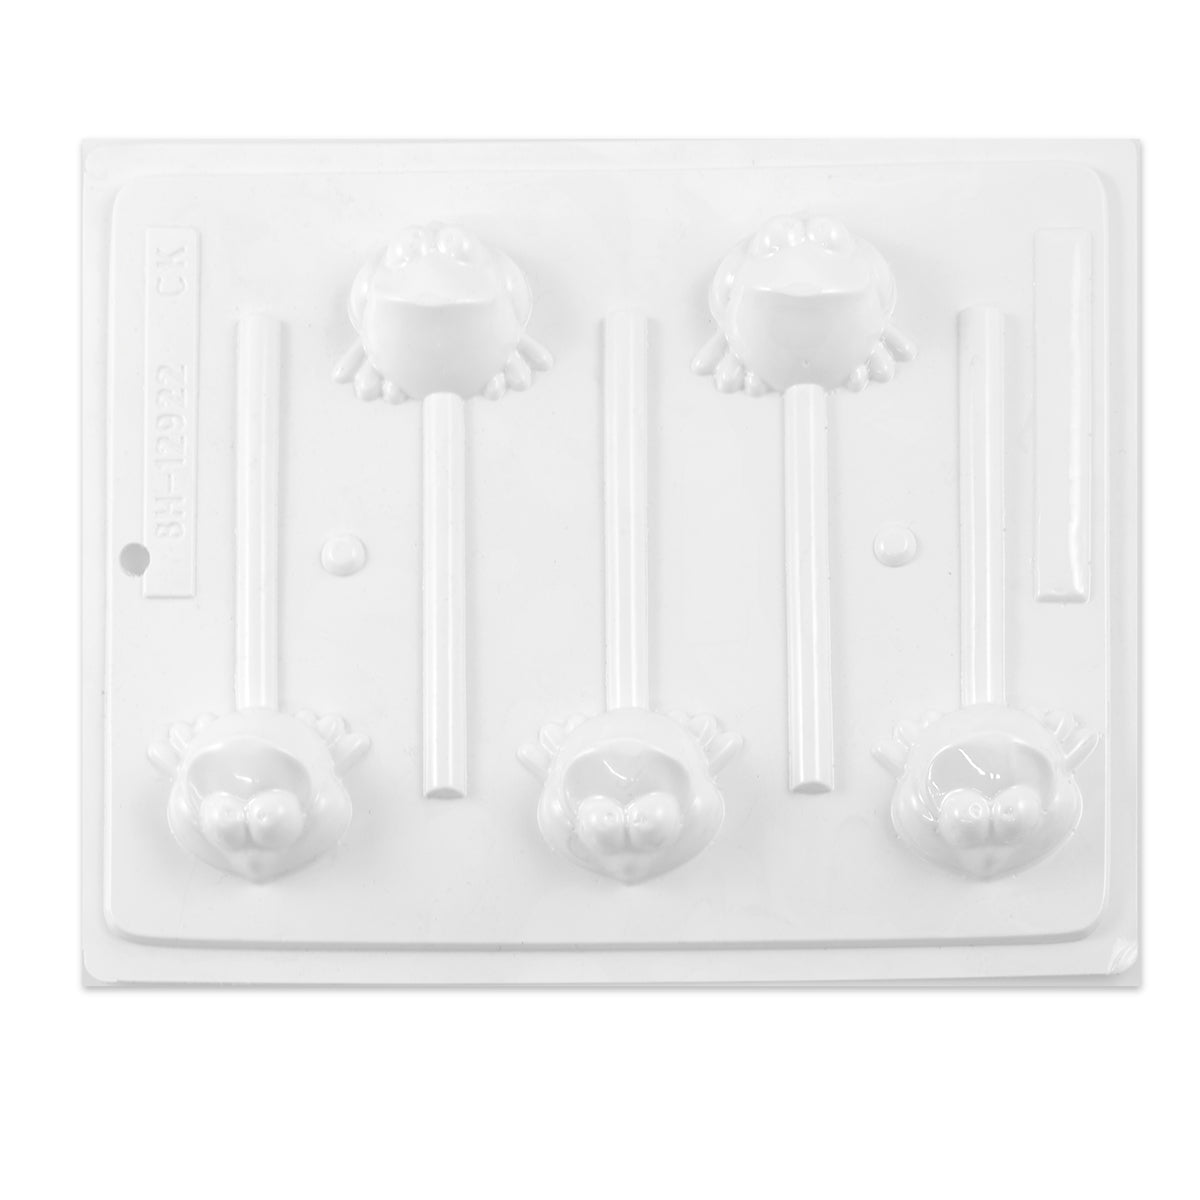 Frog Plastic Sucker Mold - While Supply Lasts